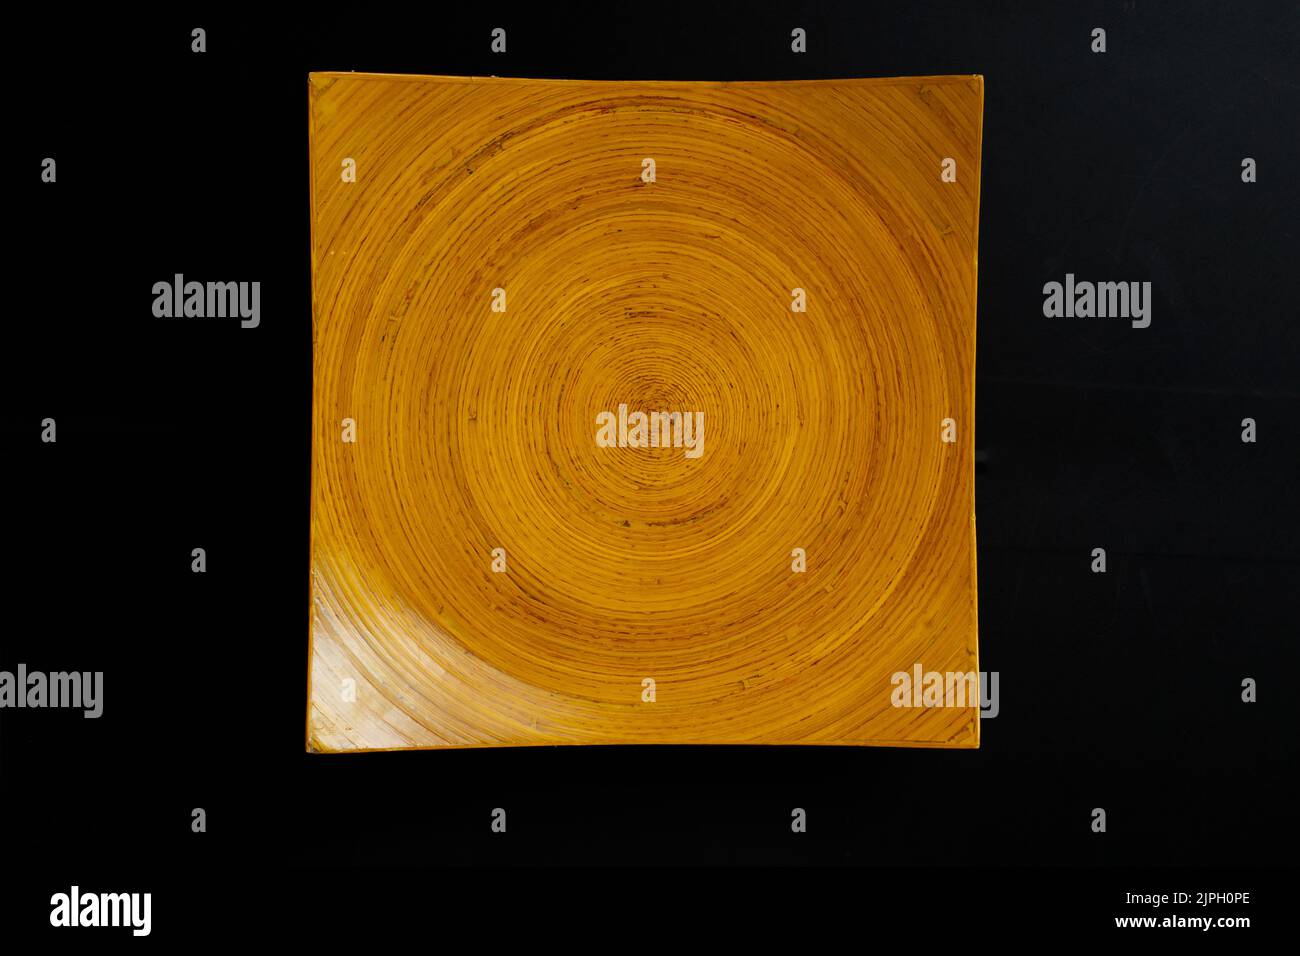 square wooden plate with concentric circles pattern. Orange textured dish isolated on black background. Stock Photo